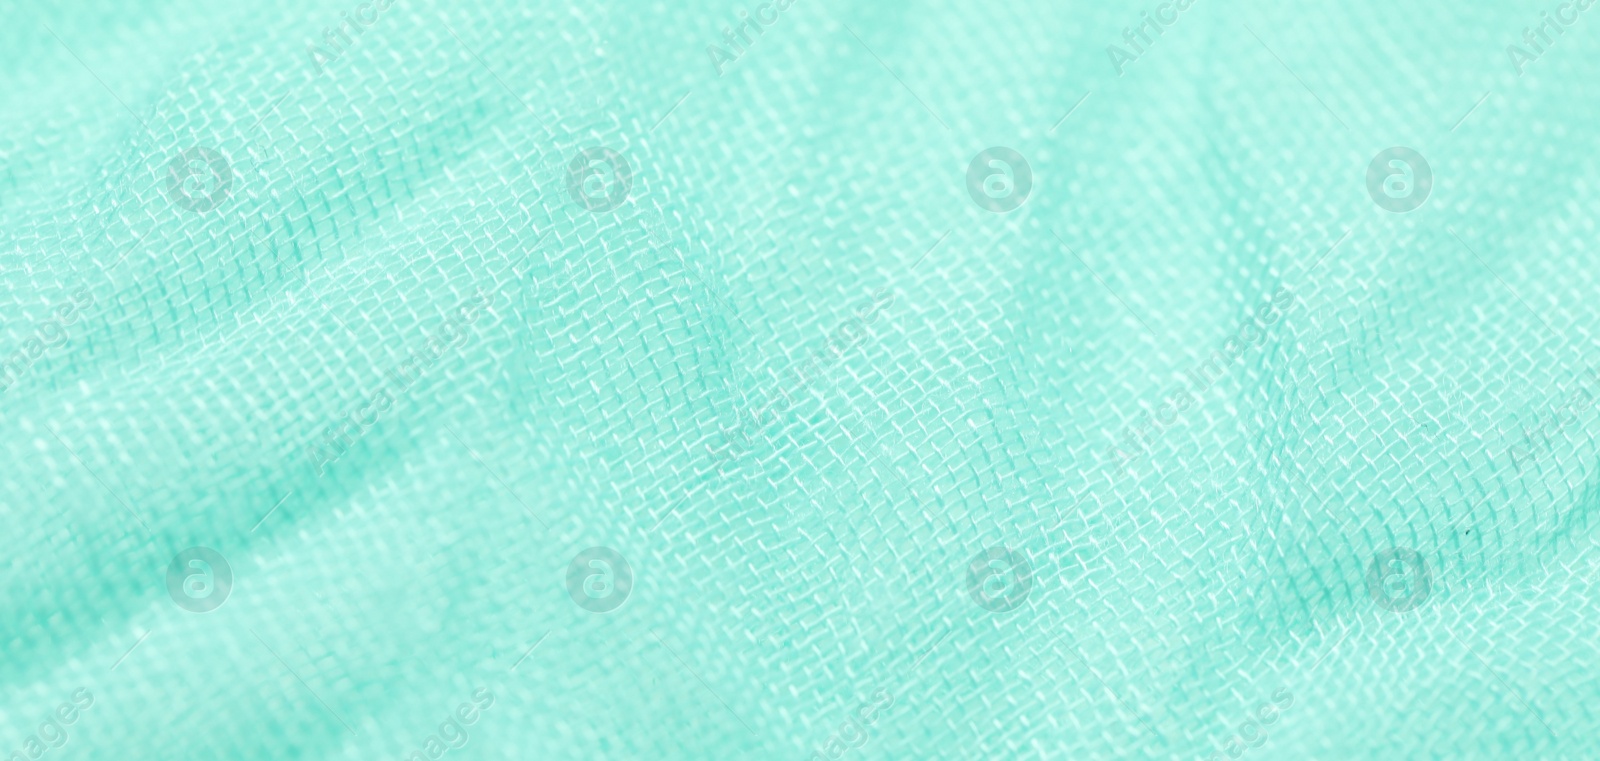 Photo of Texture of turquoise fabric as background, closeup